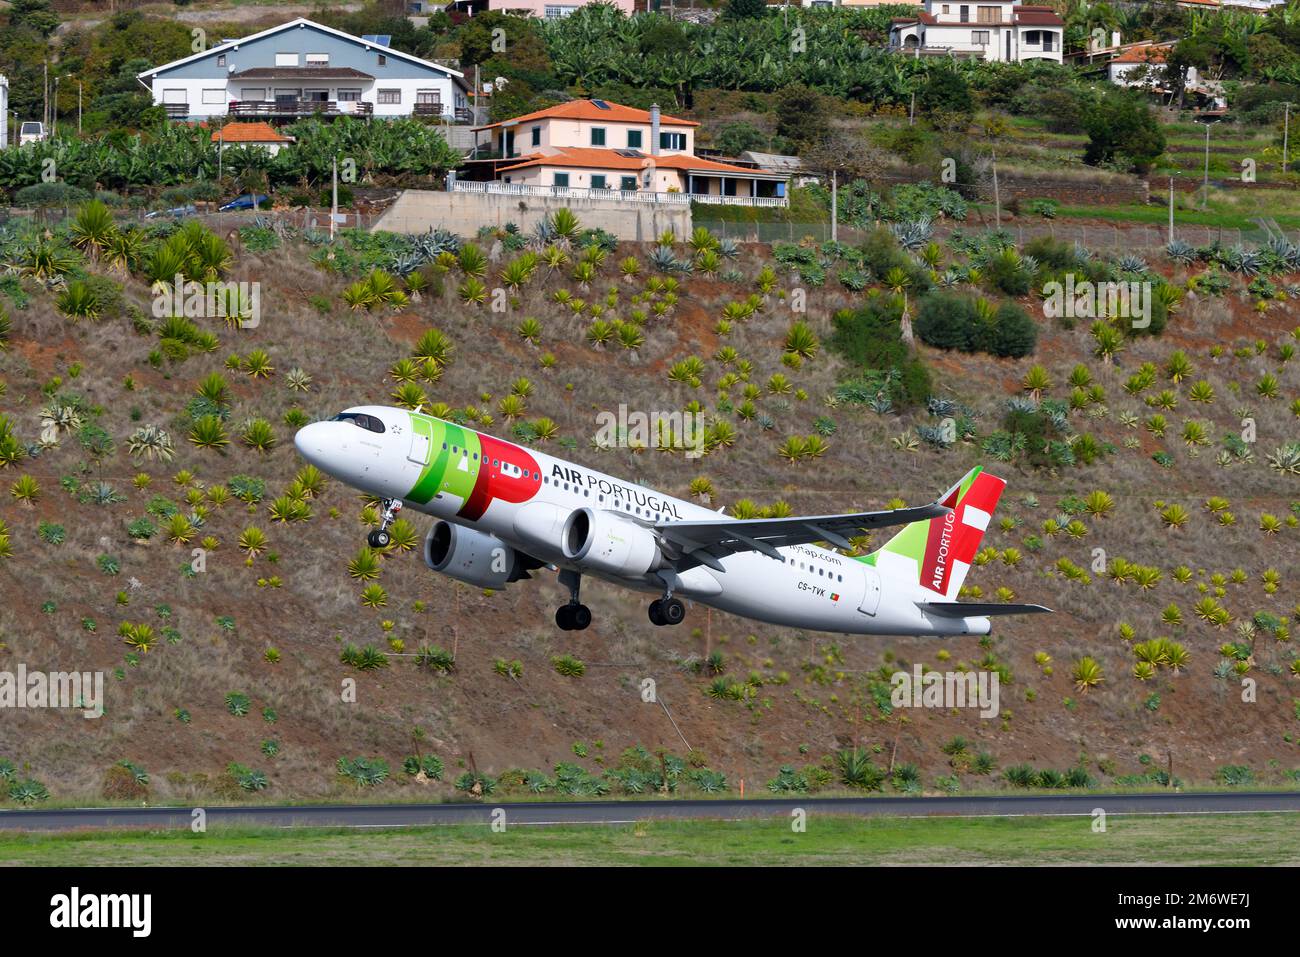 TAP Air Portugal Airbus A320 airplane taking off from Madeira Airport in Funchal Island. Airplane A320 of airline TAP Portugal departing. Stock Photo